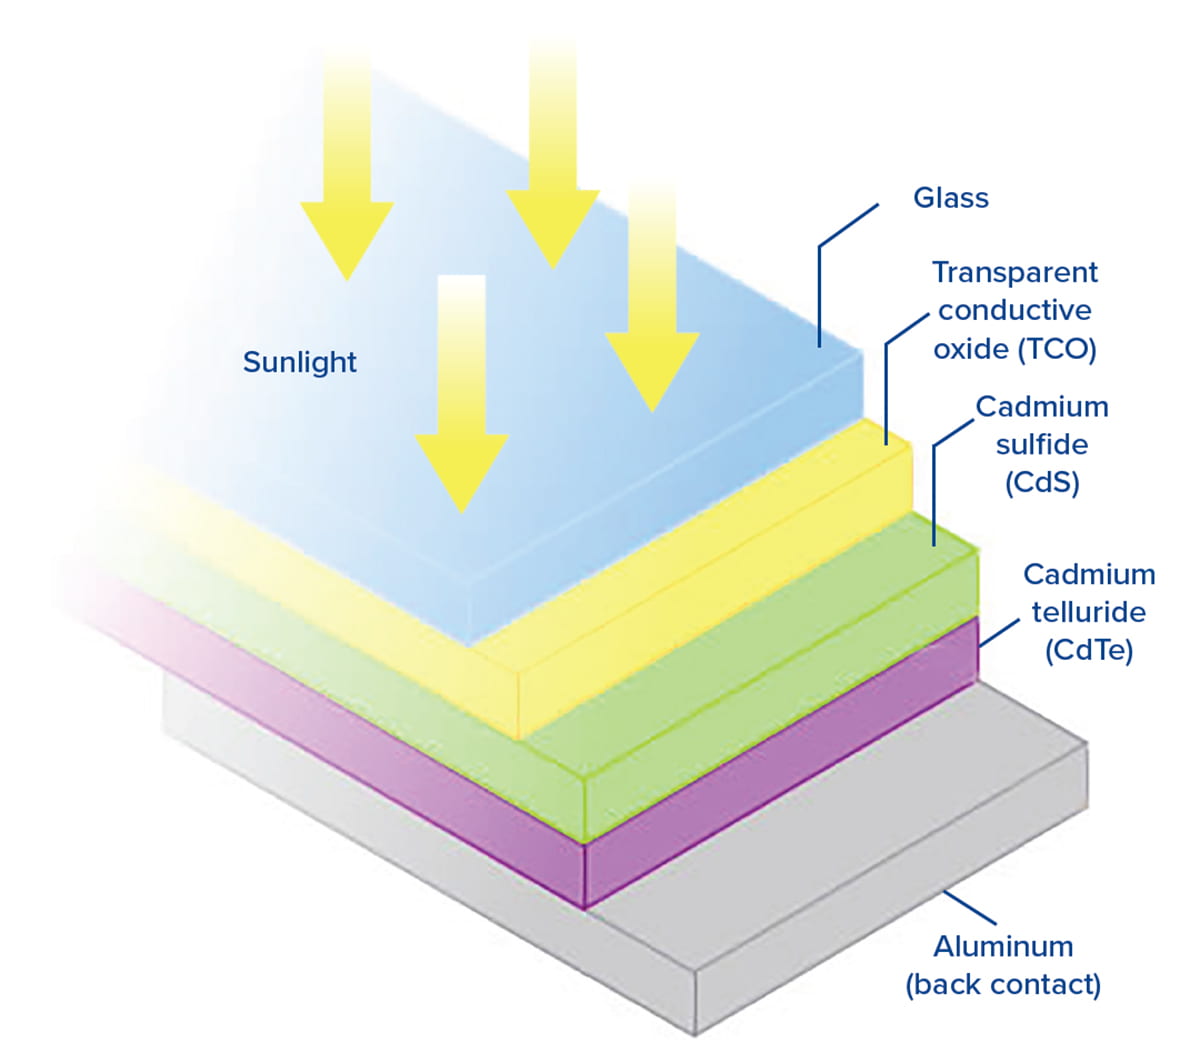 Schematic of the layers of a CdTe solar panel. Adapted from US DOE Solar Energy Technologies Office. https://www.energy.gov/eere/solar/cadmium-telluride